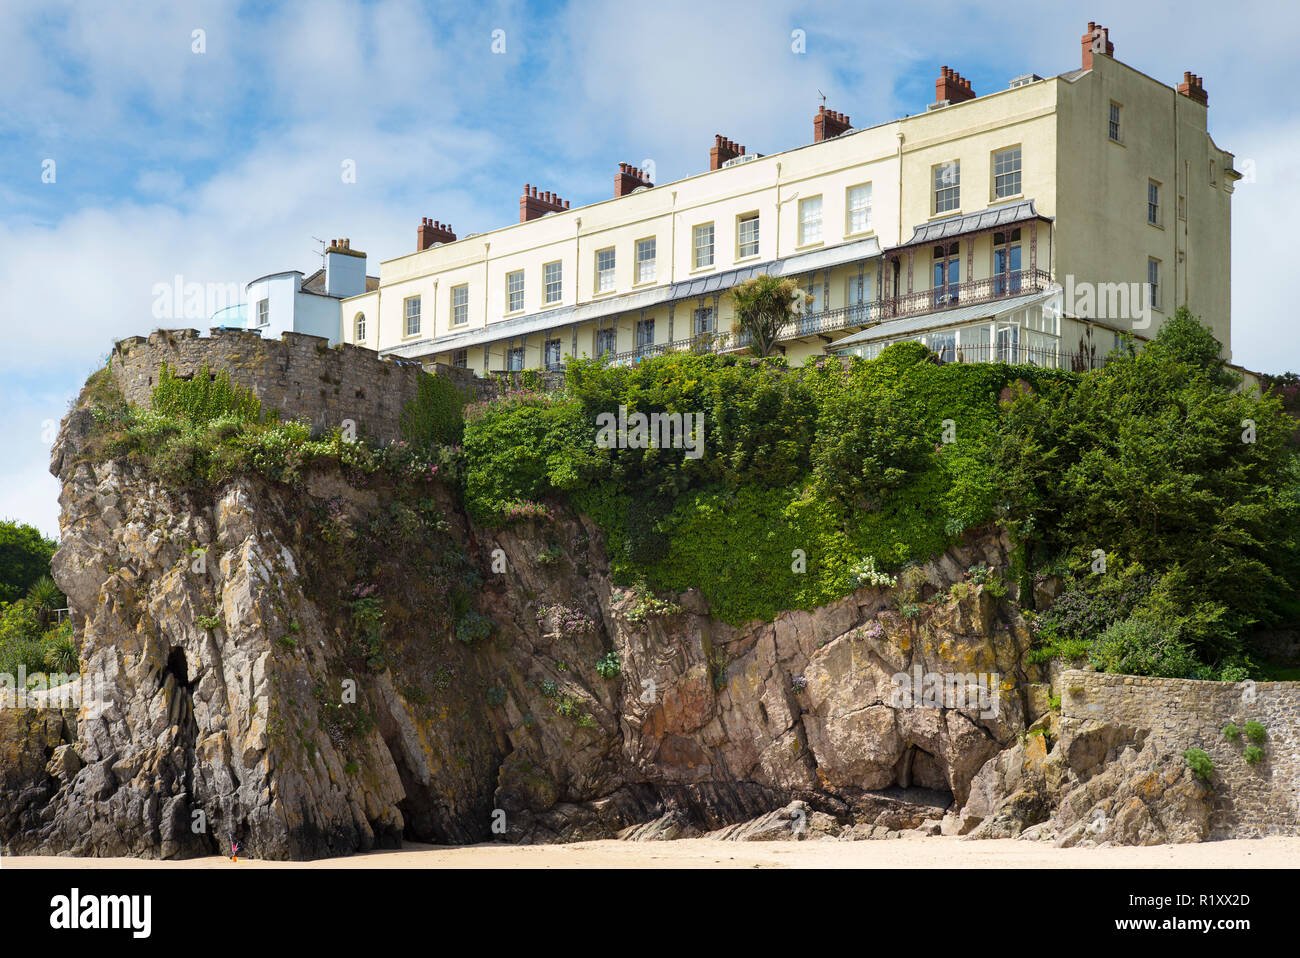 Esplanade - traditional brightly coloured seaside housing and tourist accommodation above clifftop in resort town of Tenby, Wales, UK Stock Photo